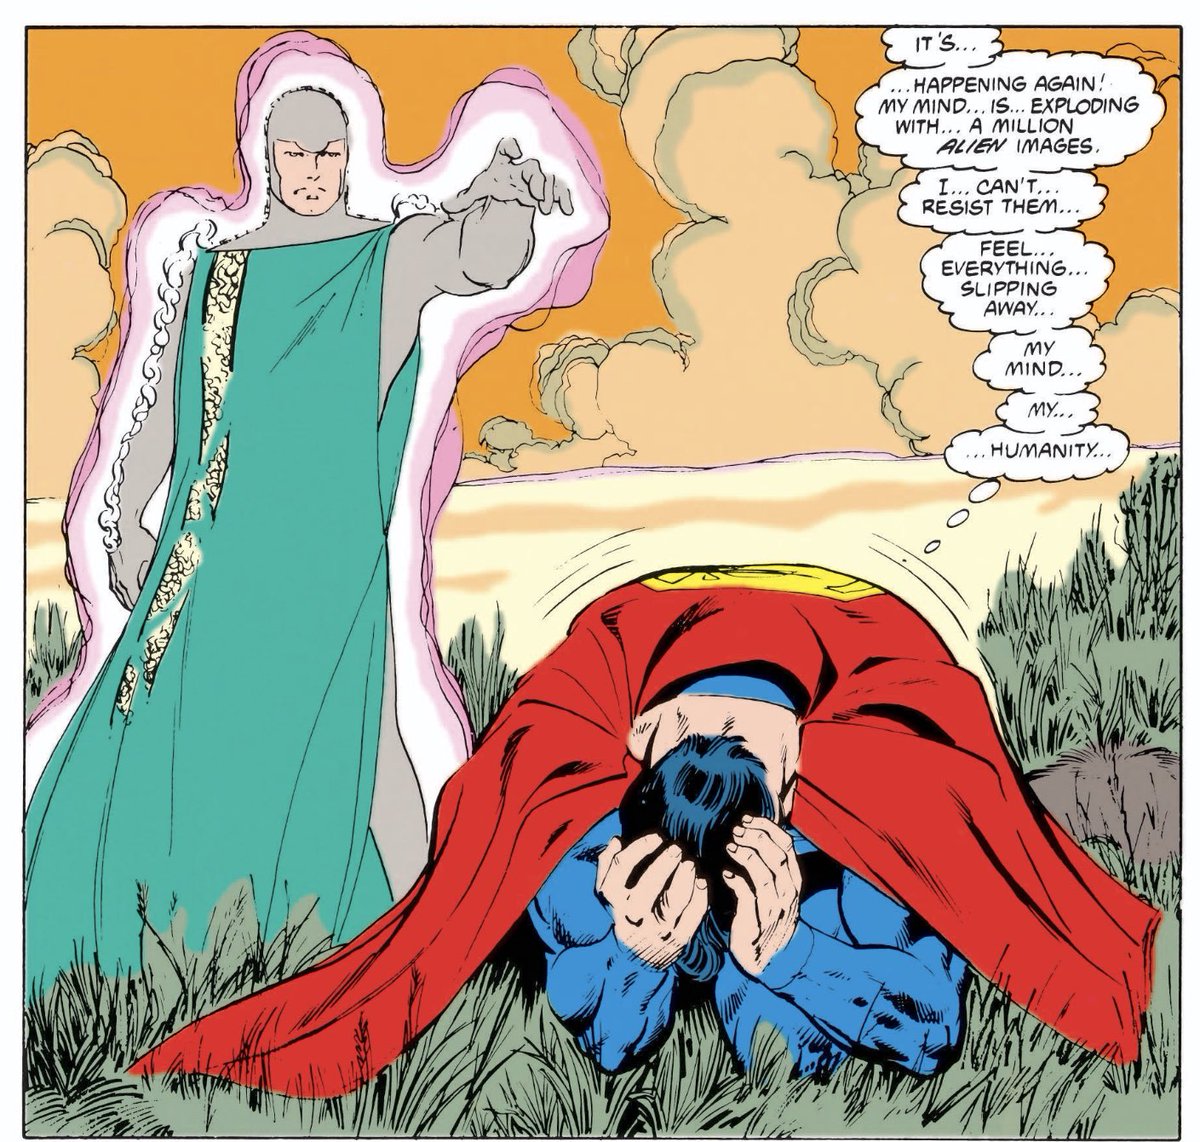 More agony as Clark endures the kryptonian Wikipedia download. This is a good, economical way to put a lot of backstory into place for later plot convenience. Remember the shot of Jonathan Kent wacking this apparition with a shovel; it will be directly referenced years hence.